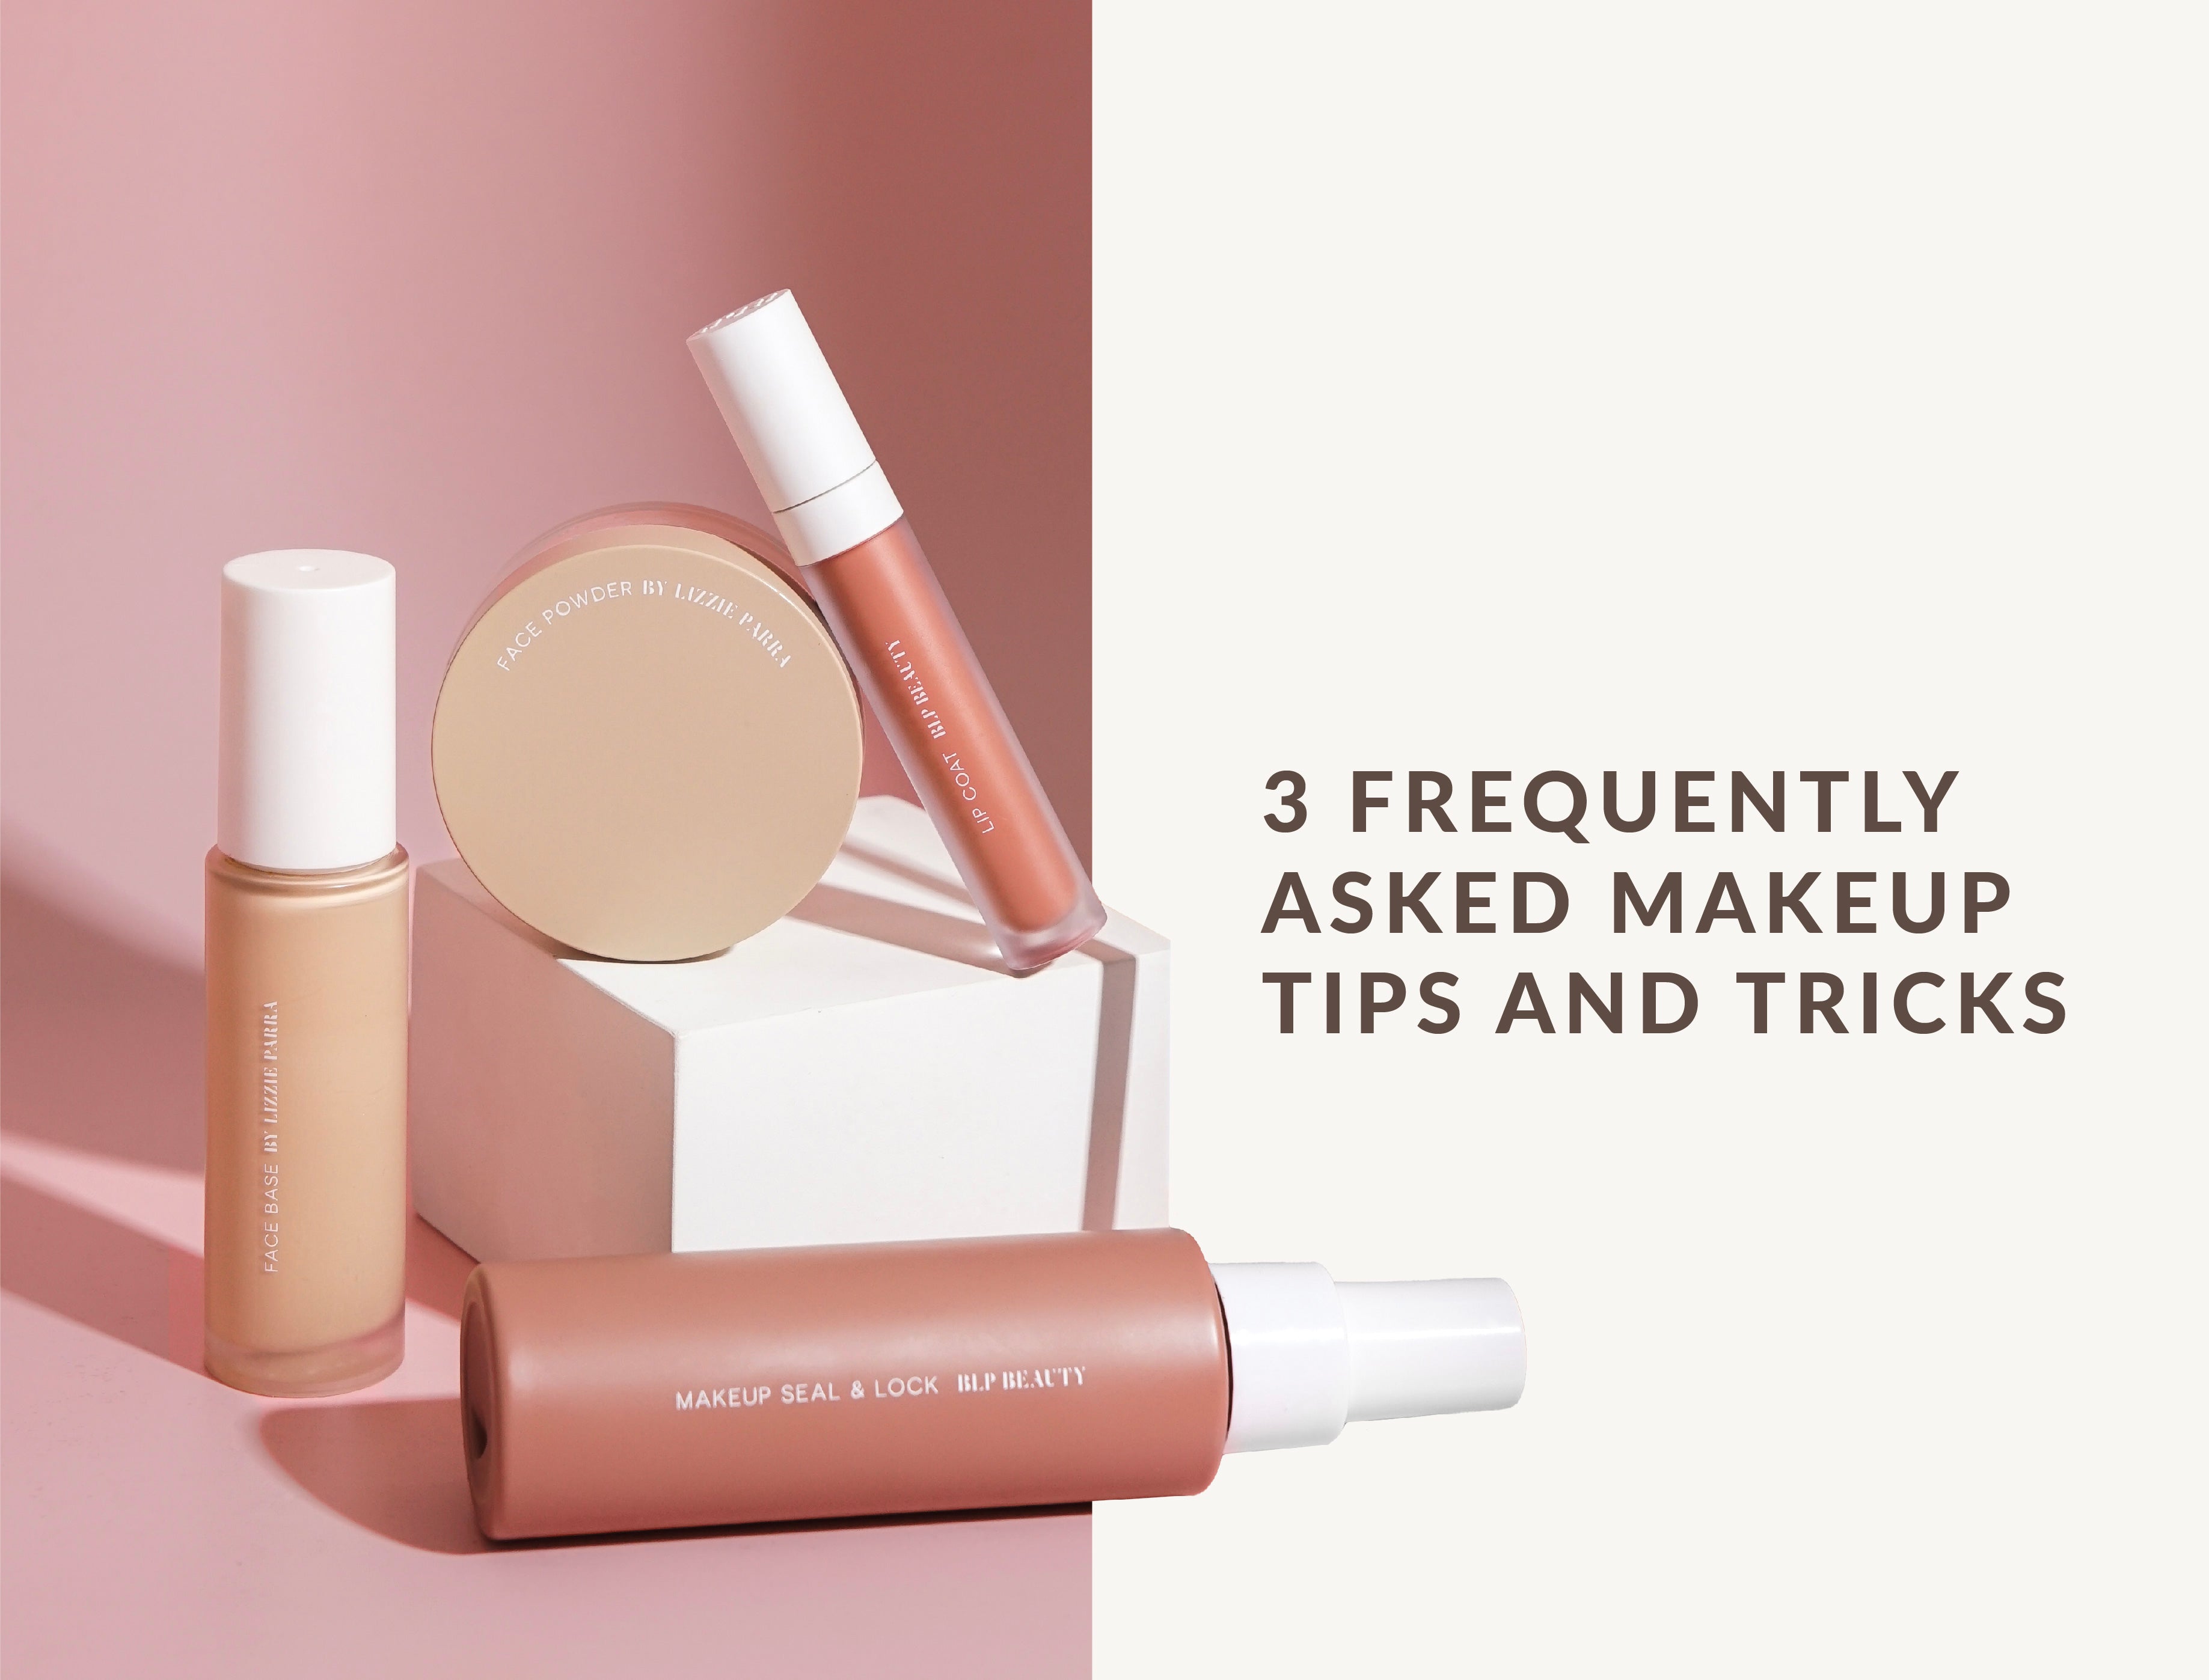 NOW TALKING | 3 FREQUENTLY ASKED MAKEUP TIPS AND TRICKS